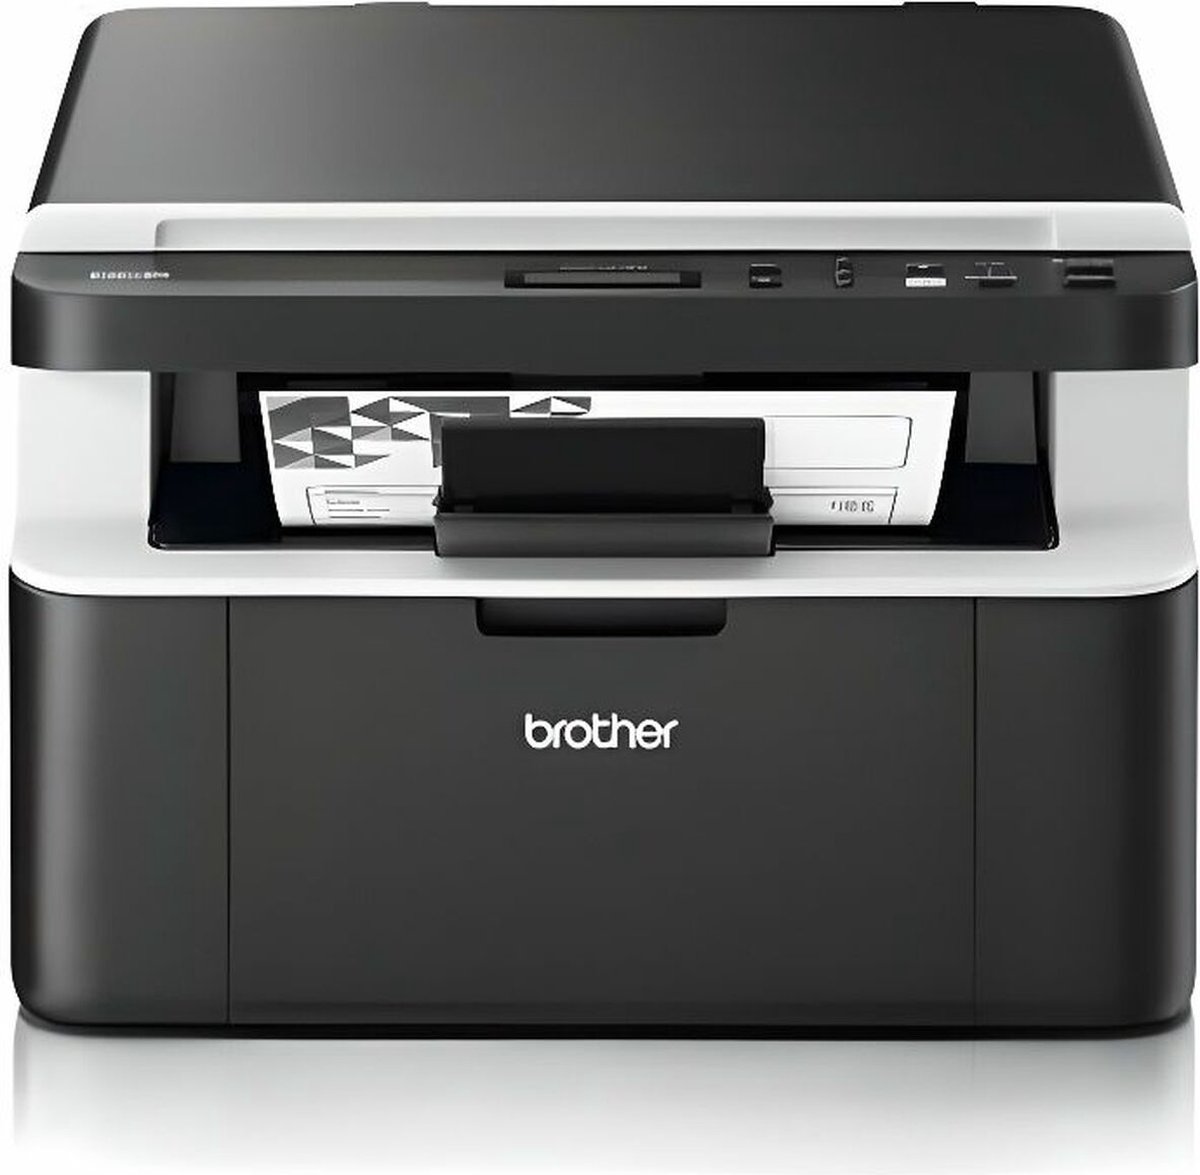 Brother DCP-1612W - All-in-One Laserprinter - Brother